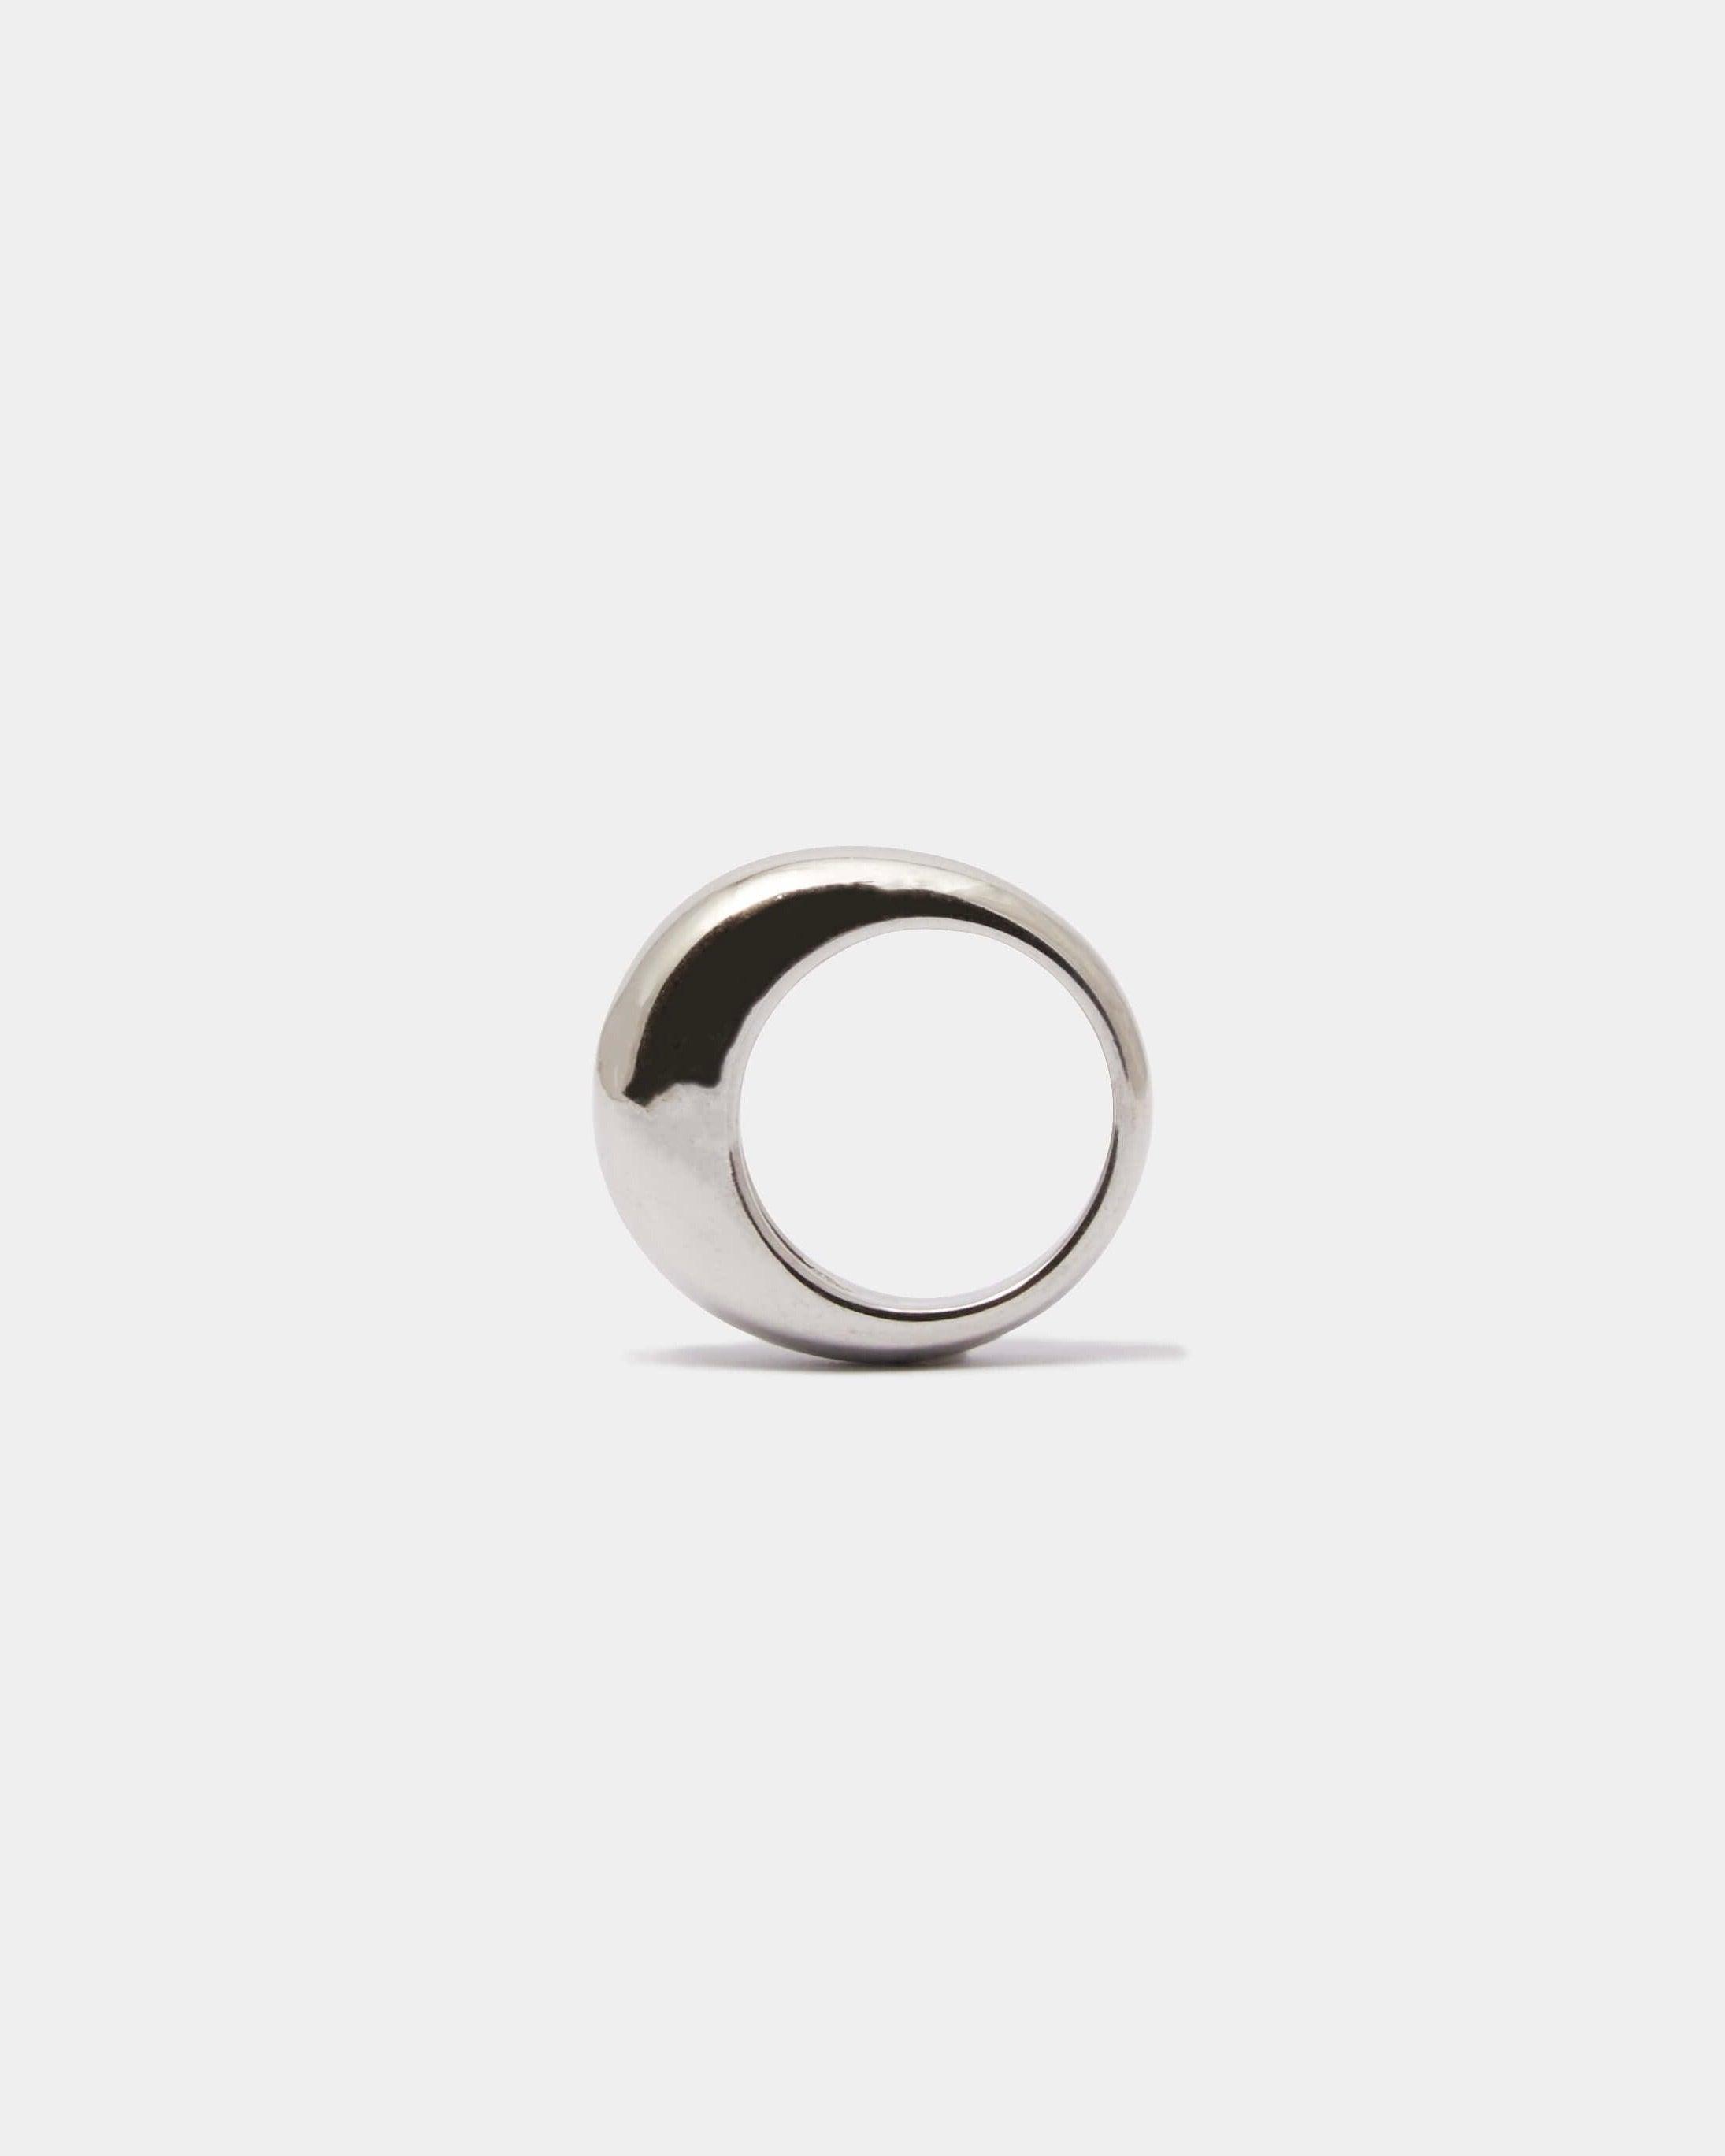 STOUT ROUND RING - LIMELY